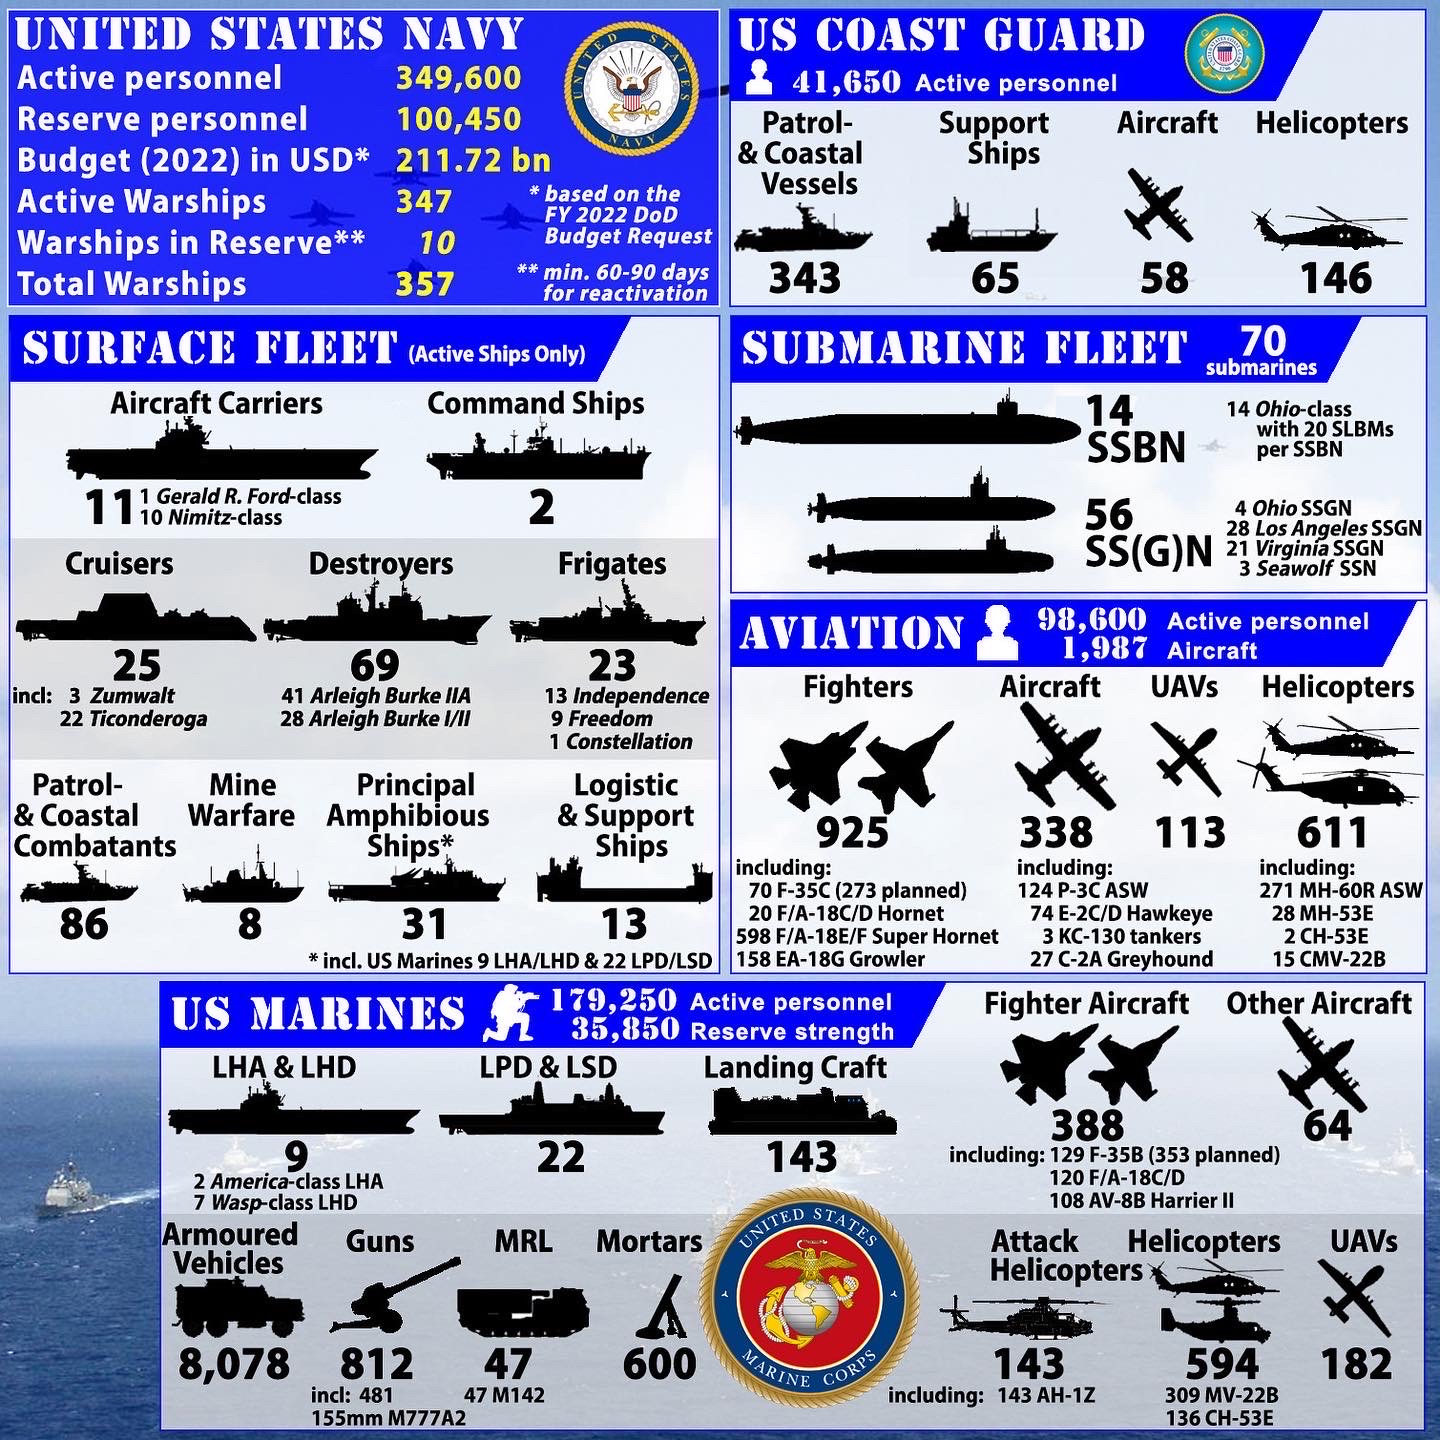 US Navy Coast Guard Infographic 2022 by indowflavour on DeviantArt